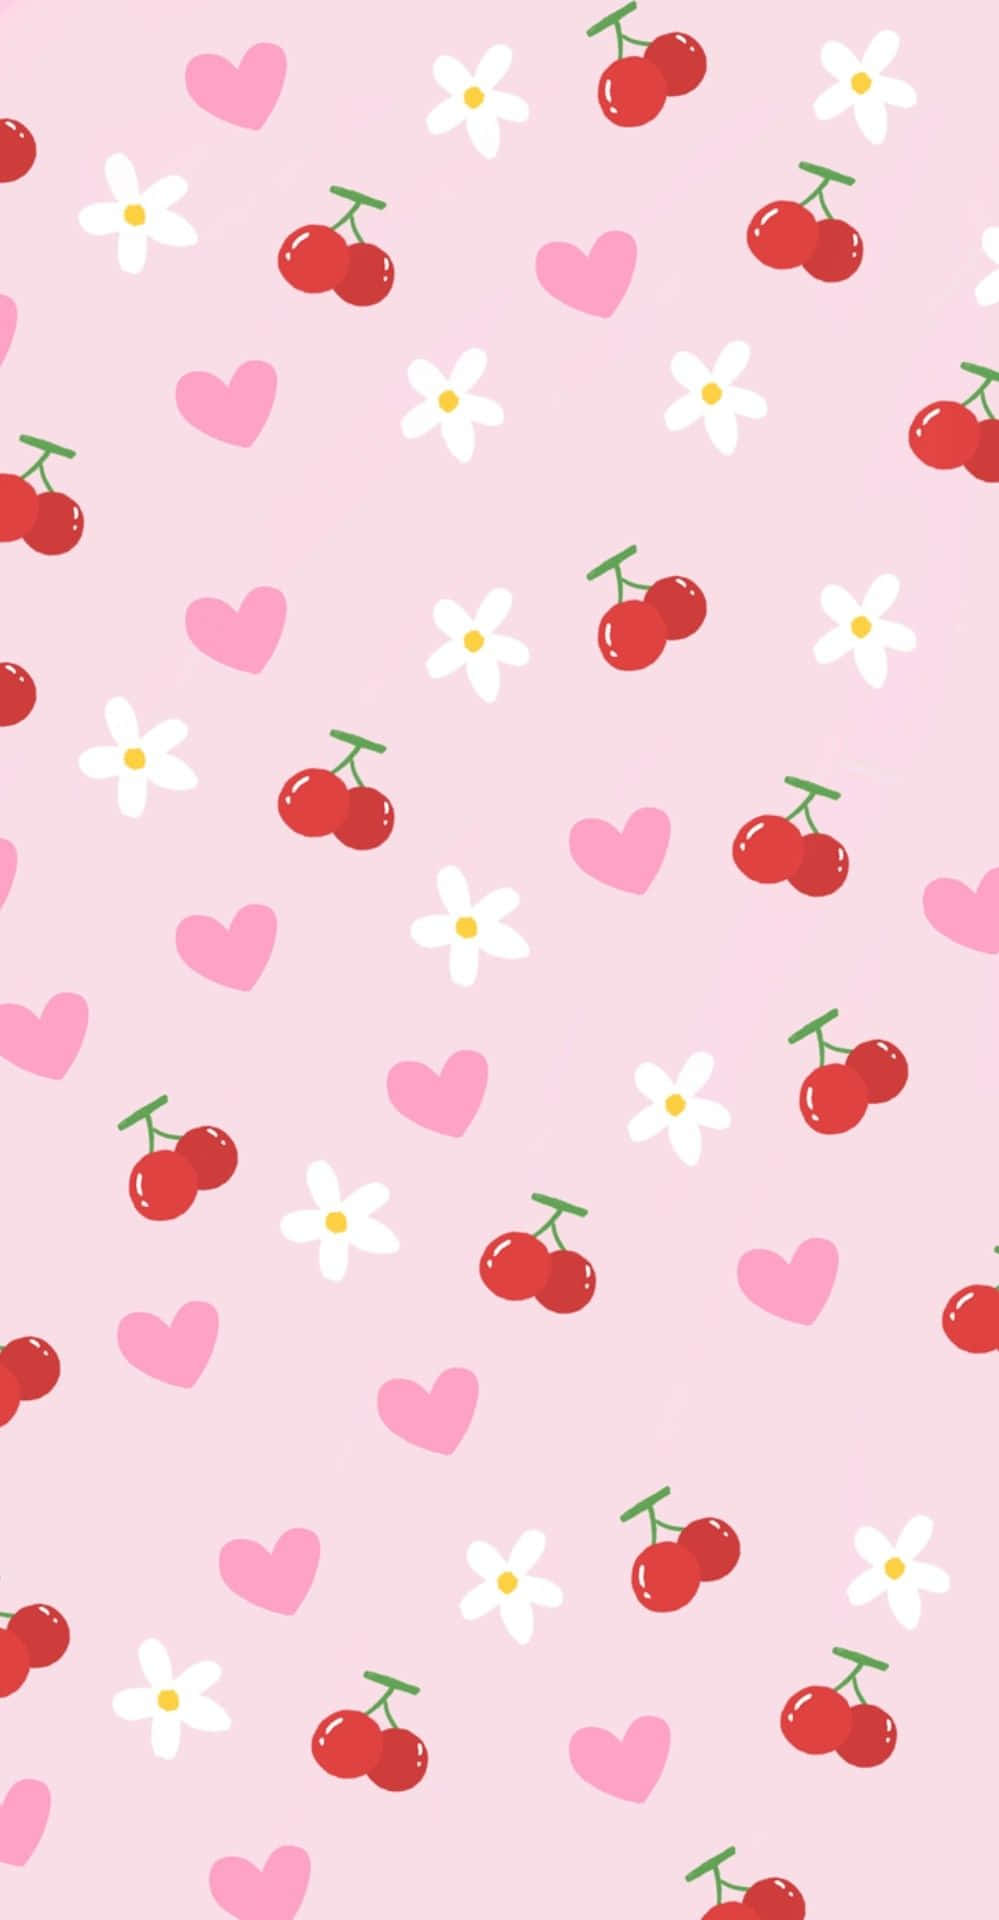 Download Cute Cherries With Pink Hearts And White Flowers Wallpaper ...